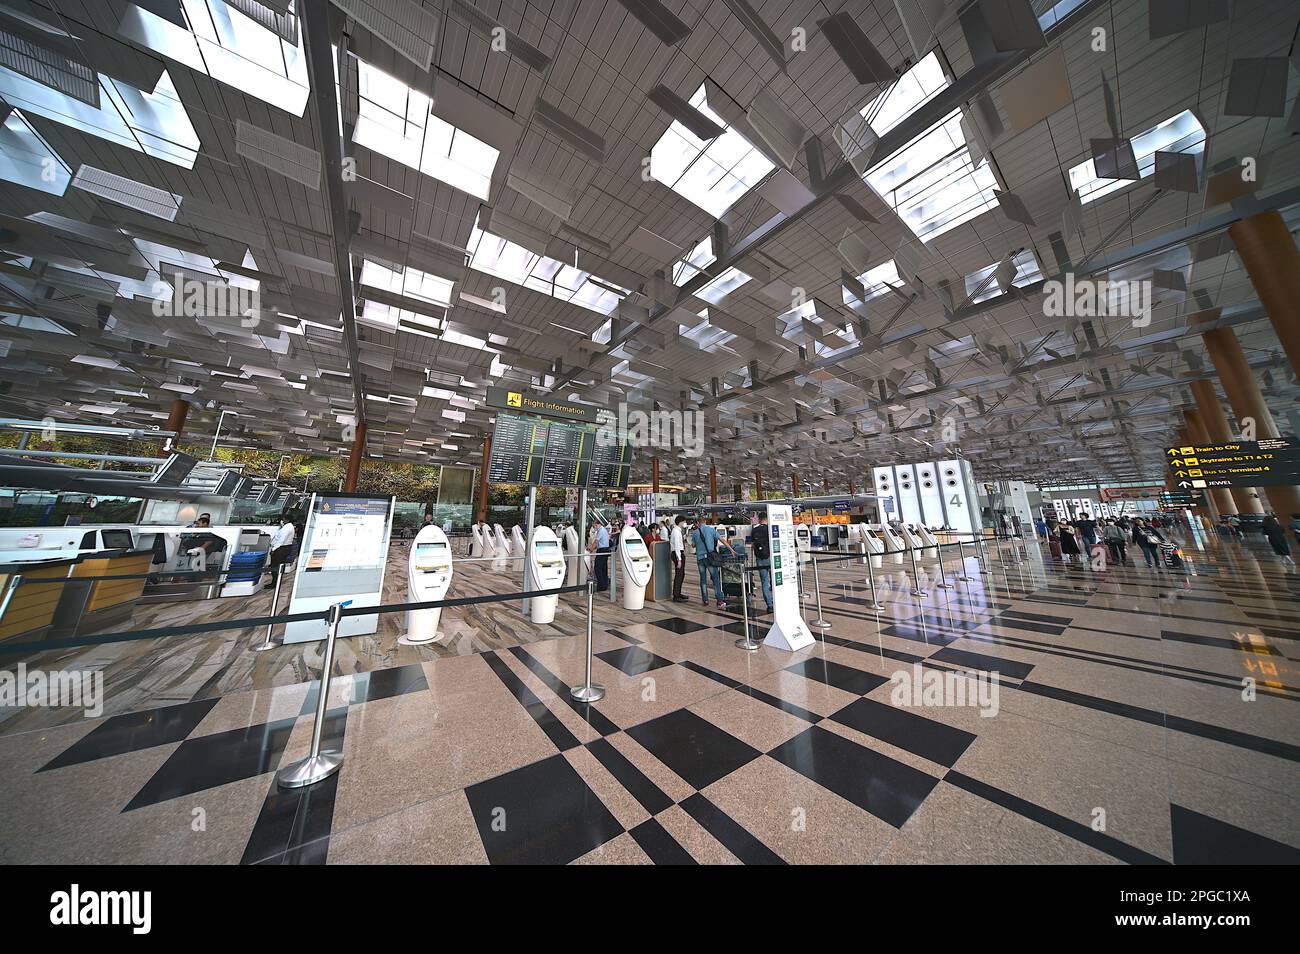 Changi Airport is a major international airport at the eastern end of Singapore, and is one of the largest transportation hubs in Asia. Terminal 3, lo Stock Photo